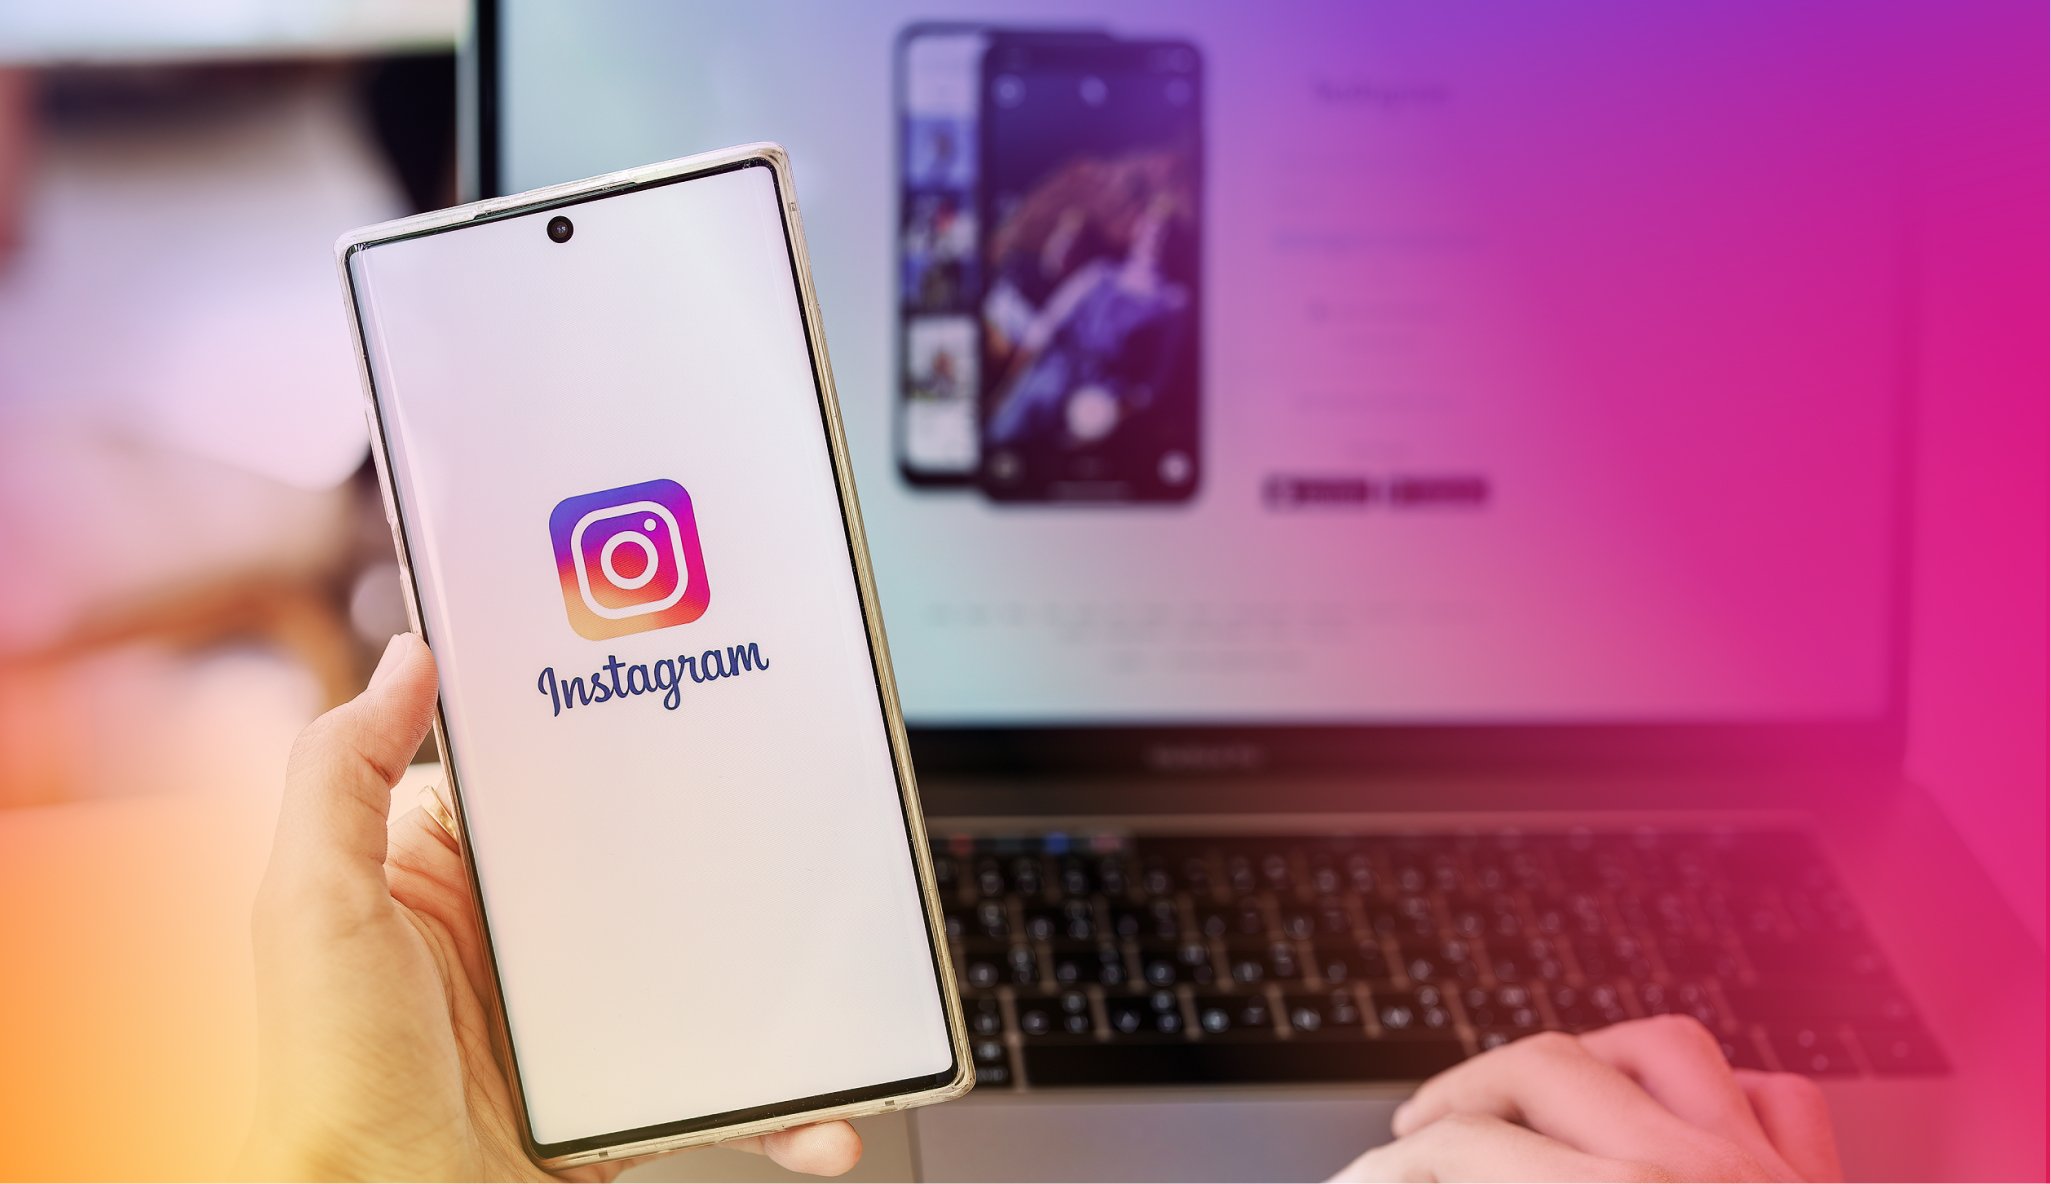 9 Best Instagram Growth Services To Engage Followers